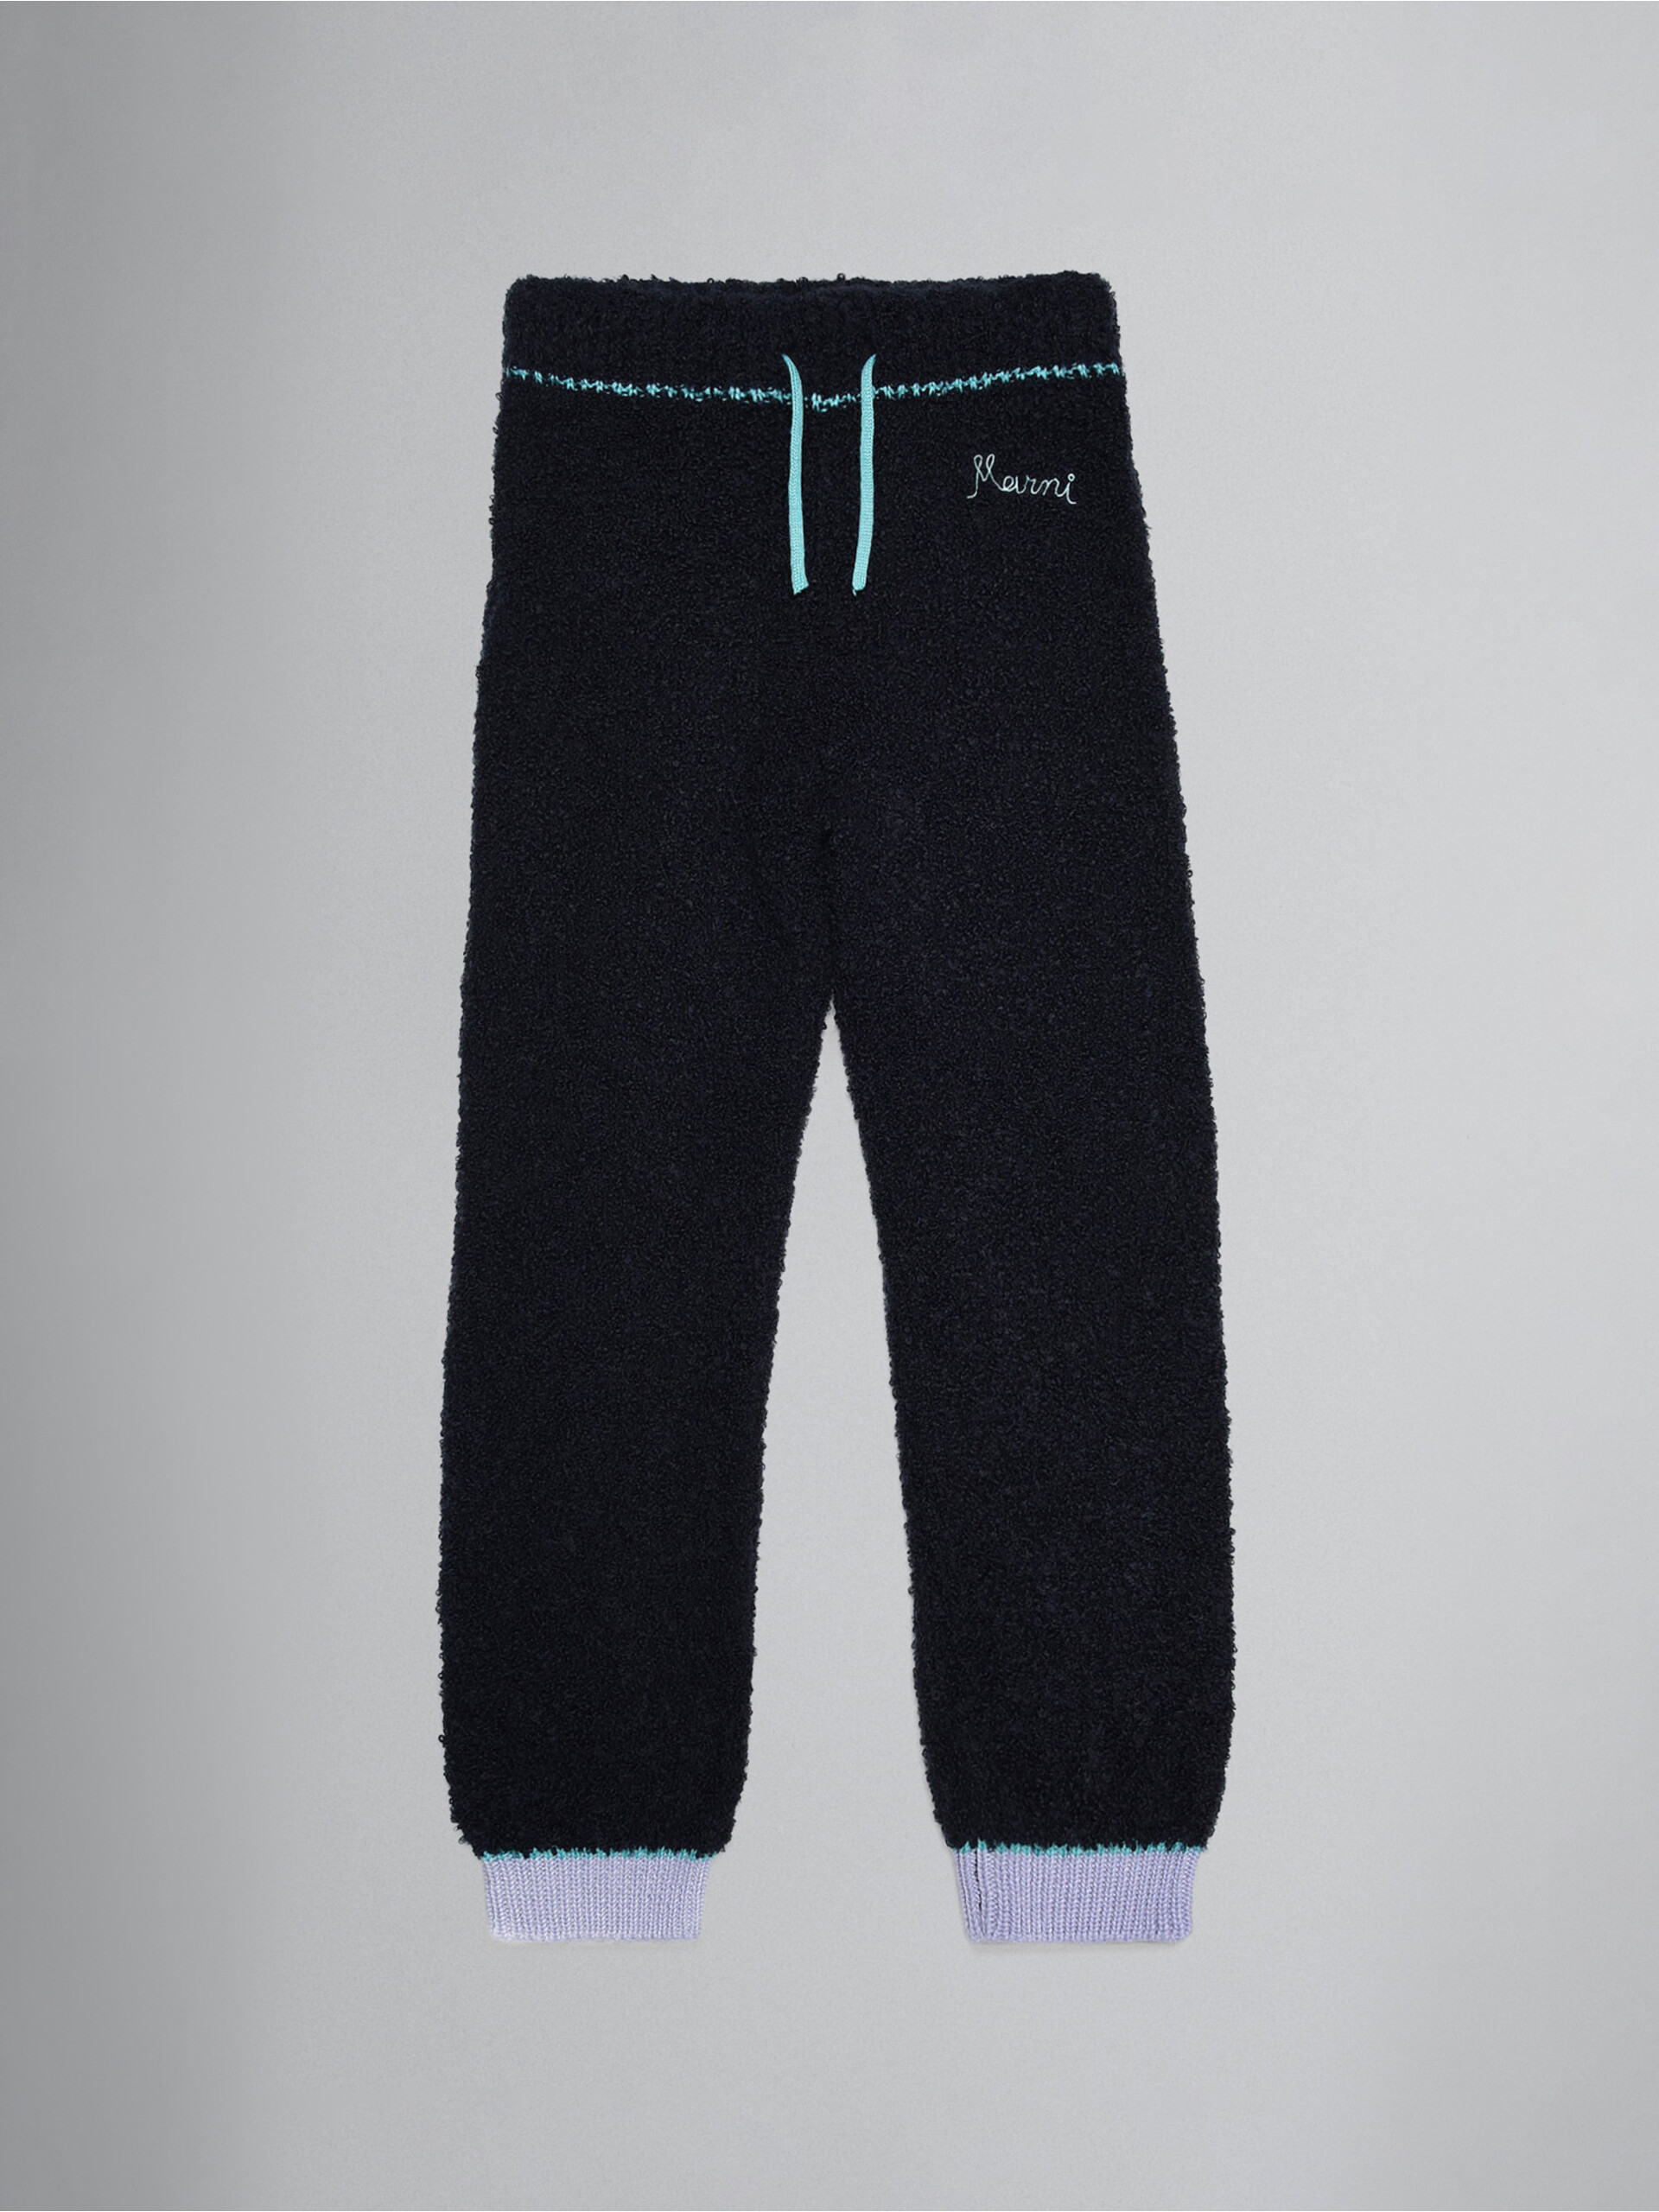 Navy blue teddy track pants with embroidery - Pants - Image 1